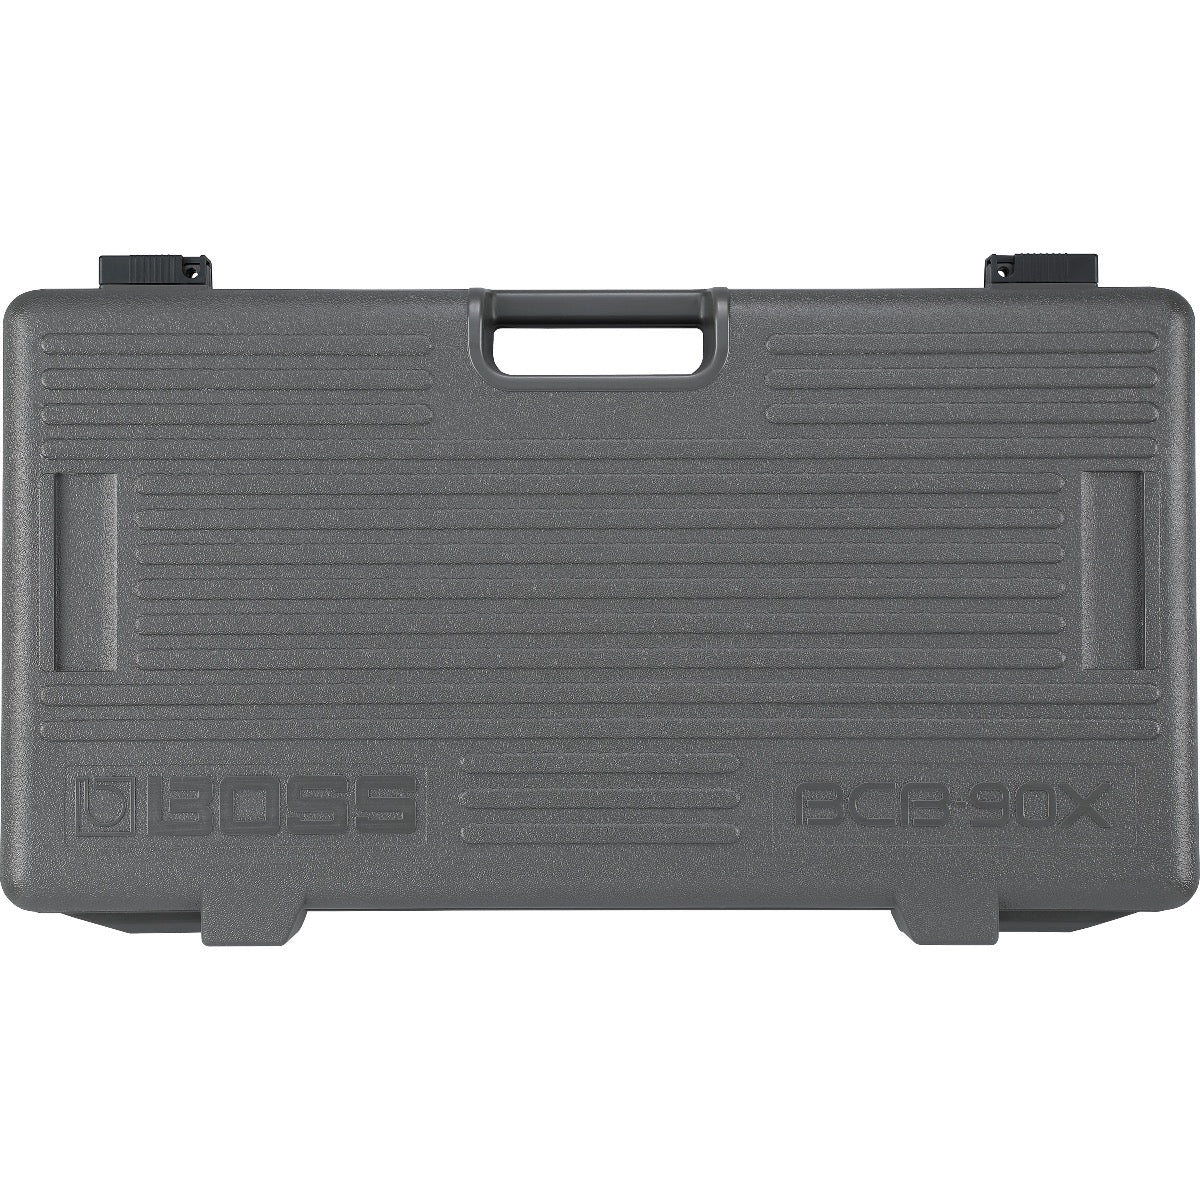 Top view of Boss BCB-90X Guitar Effects Pedalboard with lid attached